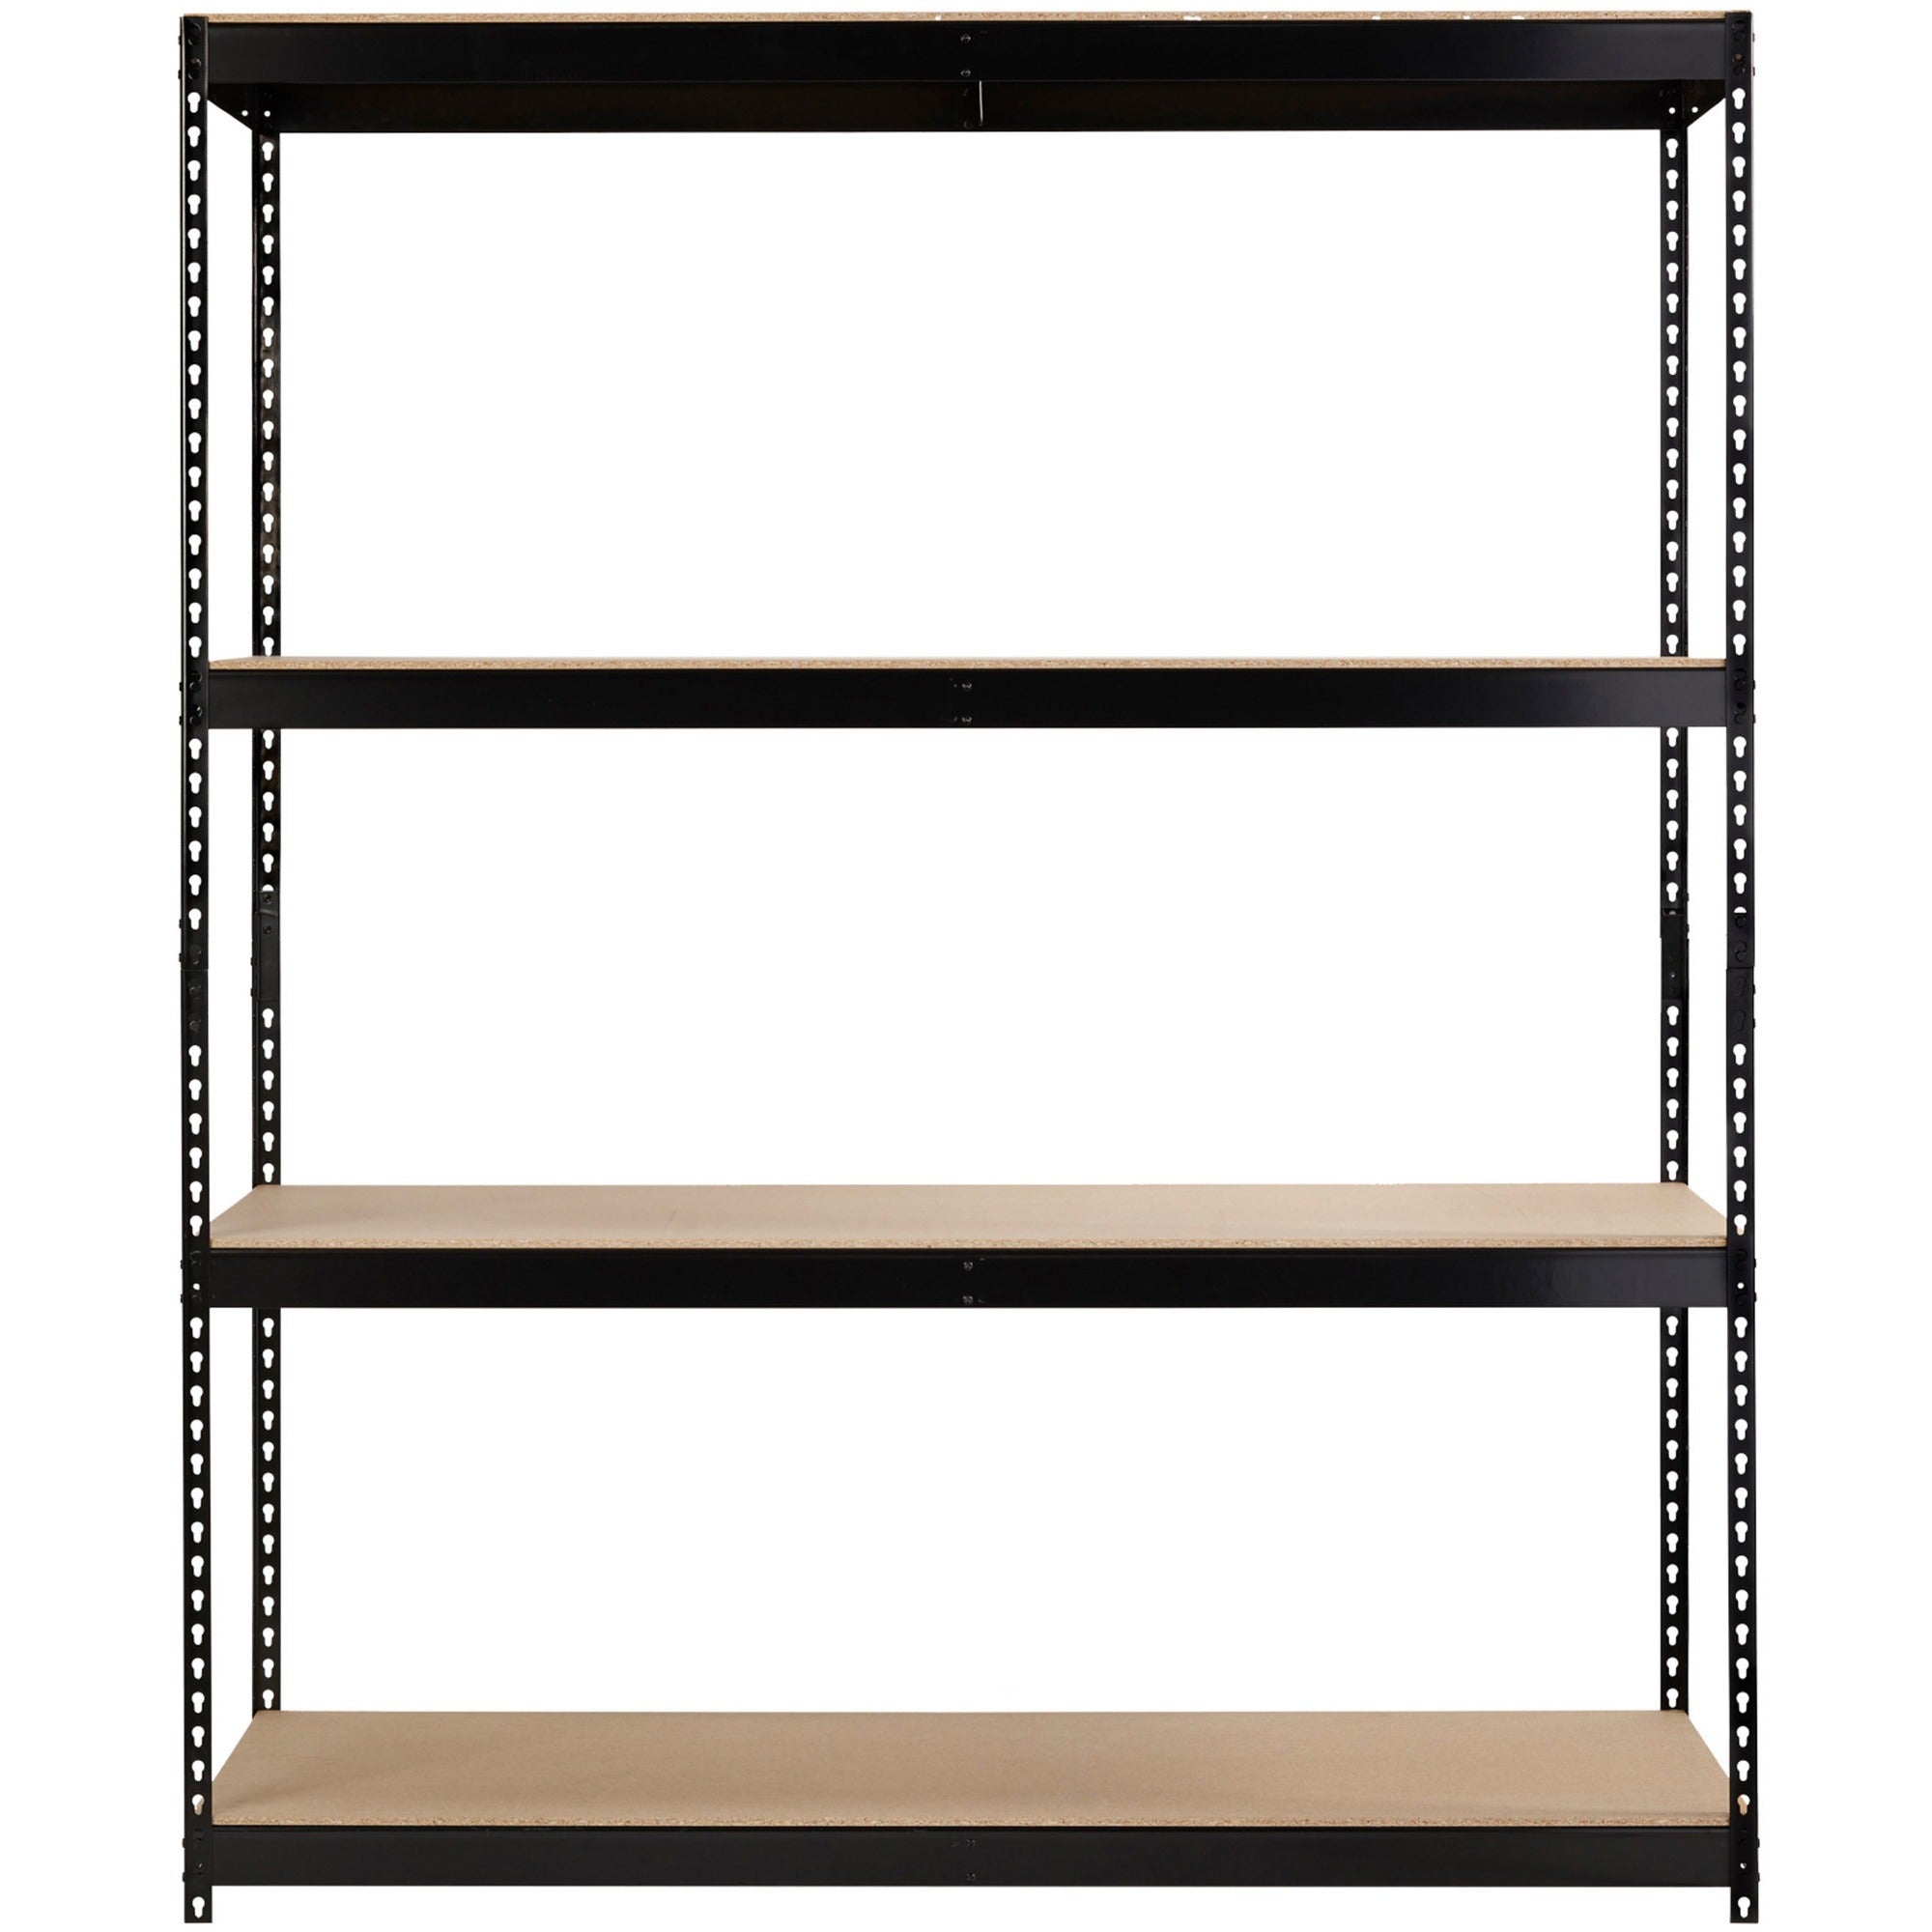 lorell-archival-shelving-80-x-box-4-compartments-84-height-x-69-width-x-33-depth-28%-recycled-black-steel-particleboard-1-each_llr99839 - 2